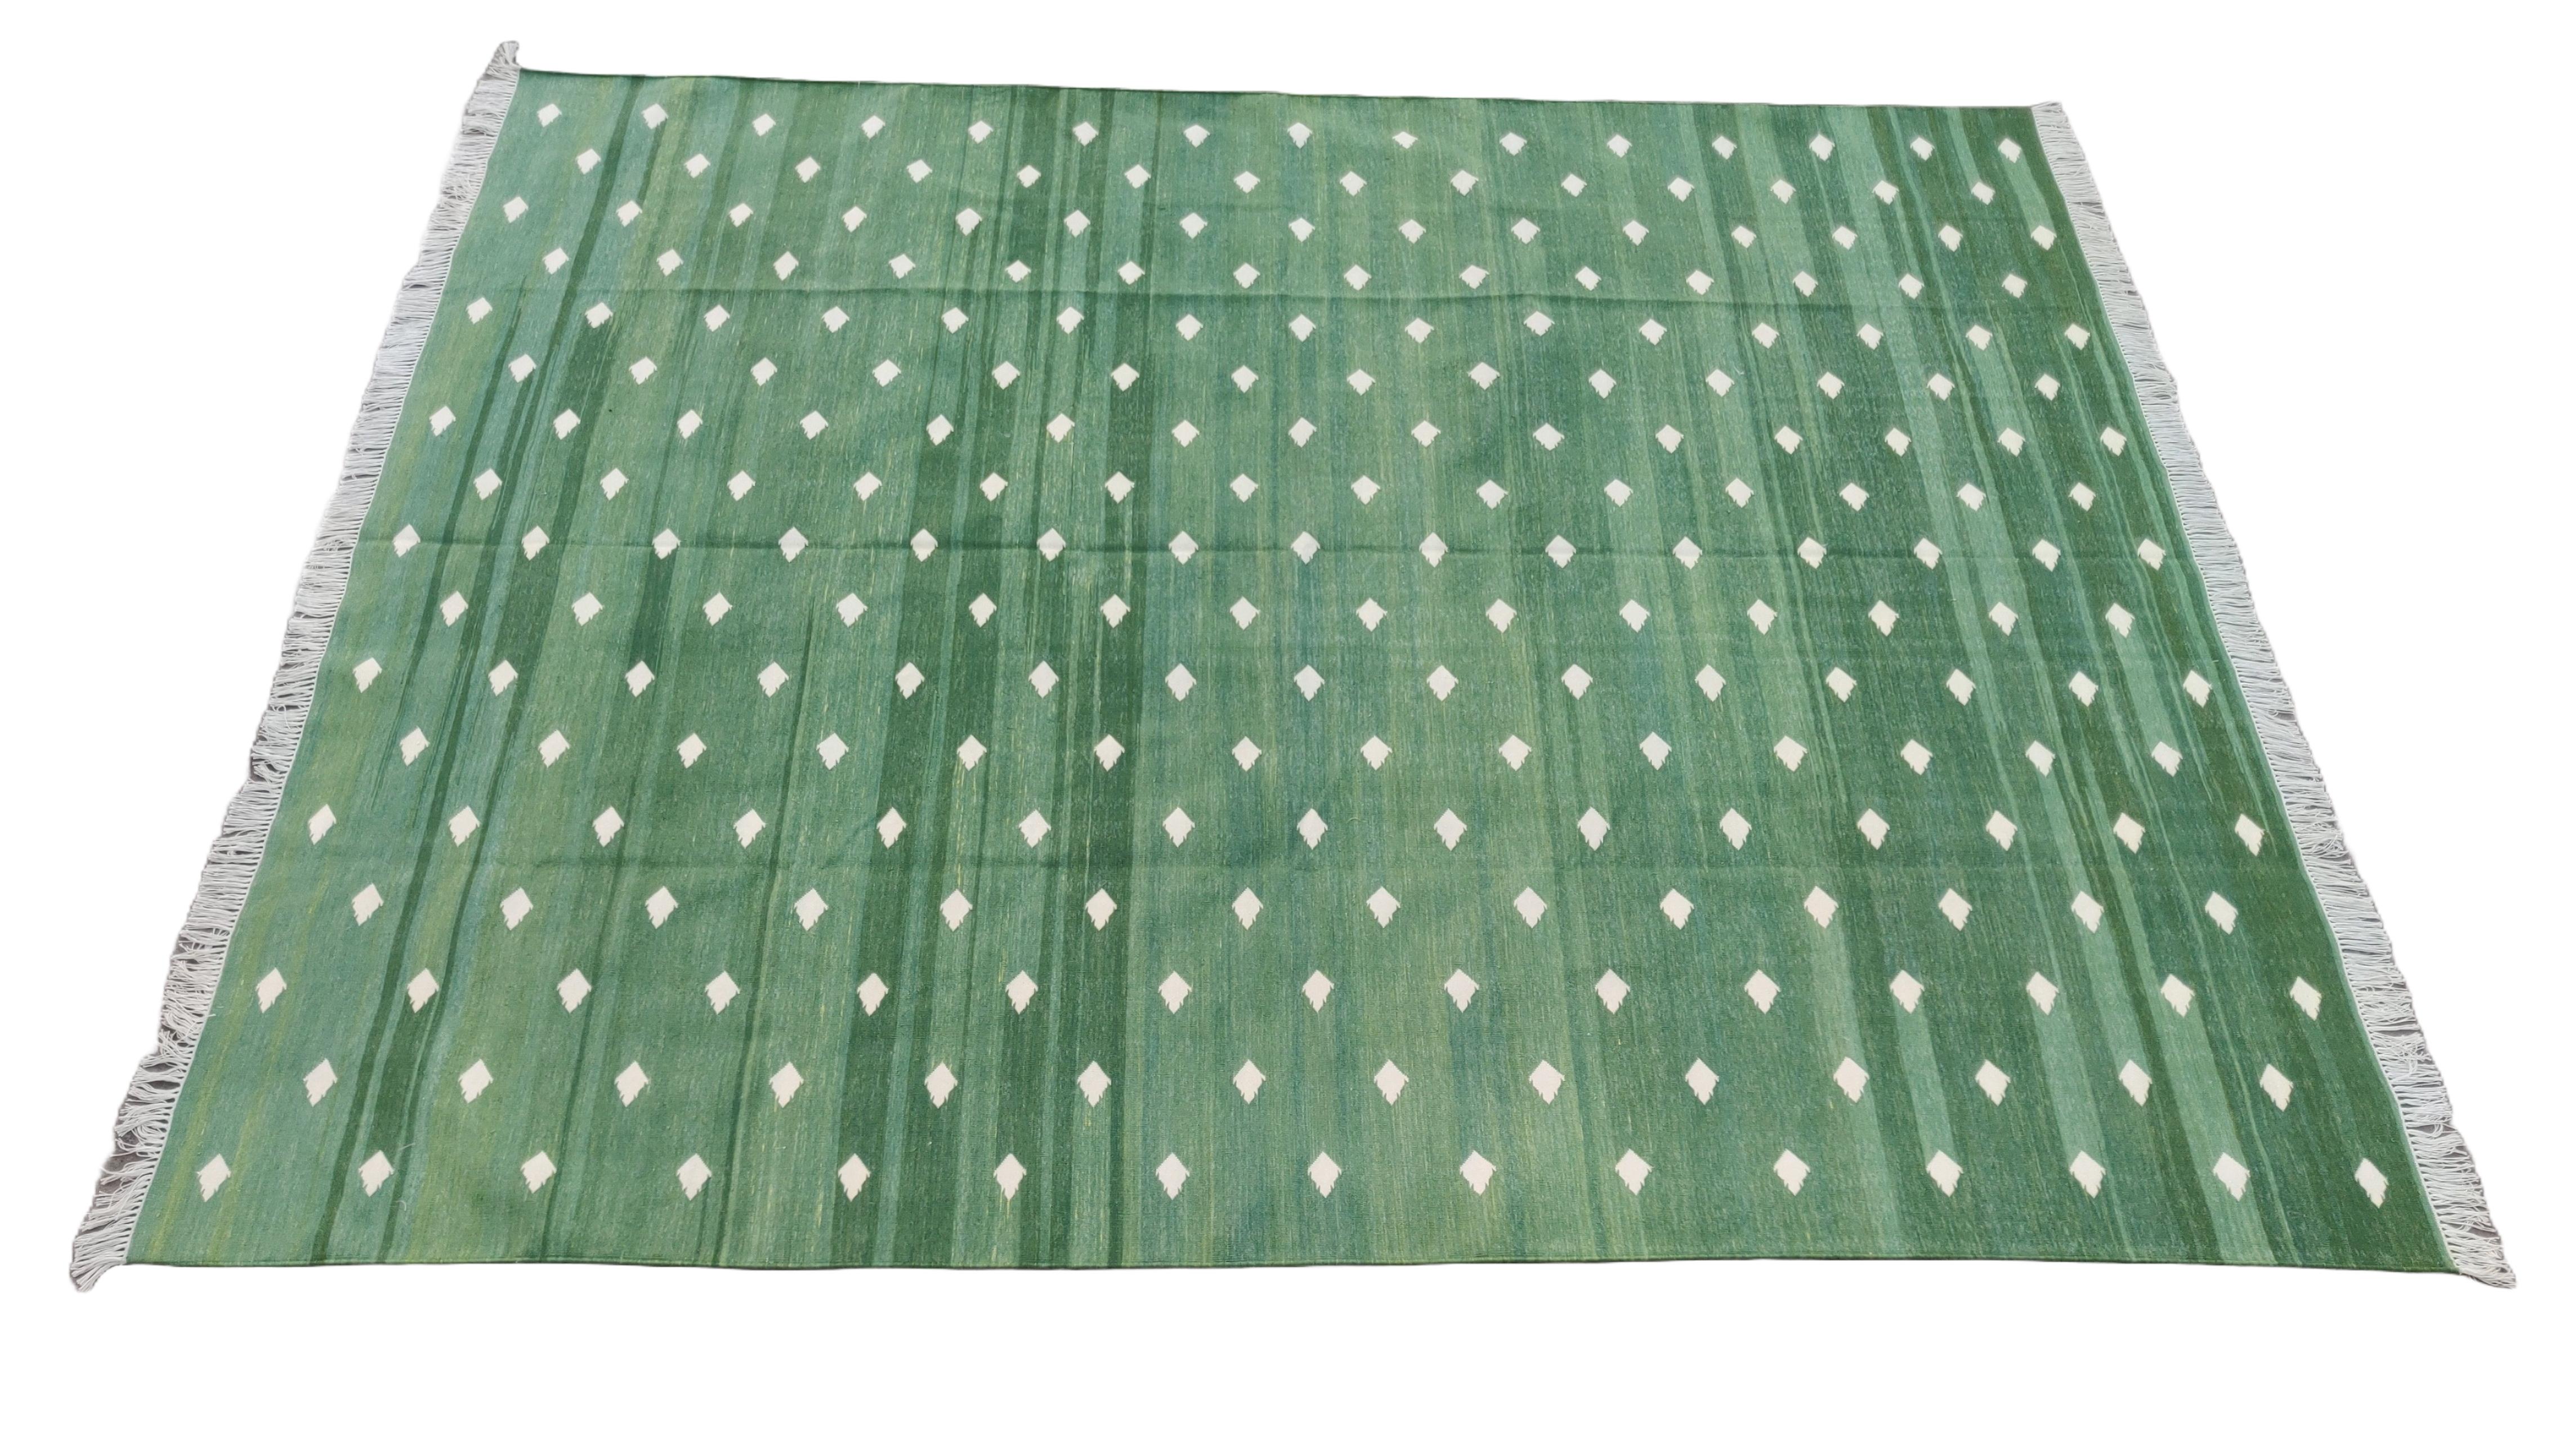 Mid-Century Modern Handmade Cotton Area Flat Weave Rug, Green & White Leaf Patterned Indian Dhurrie For Sale